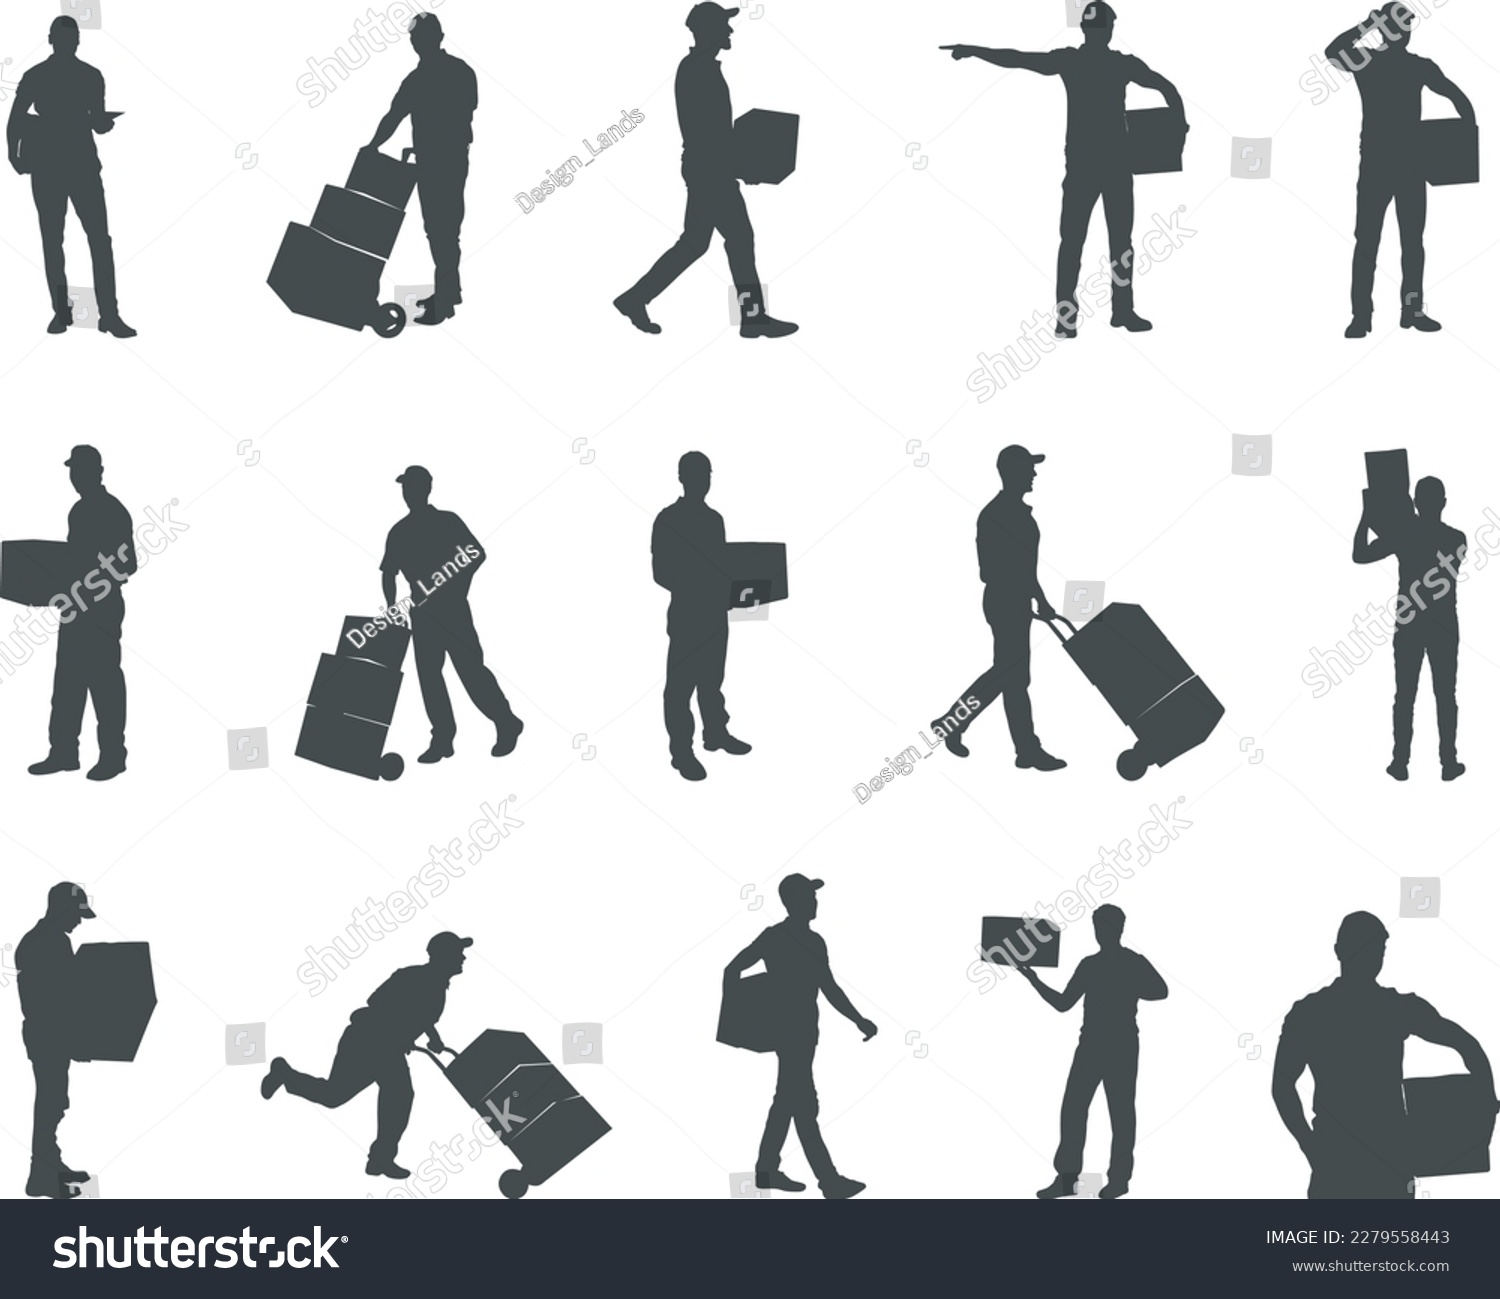 SVG of Delivery man silhouette, Courier service silhouettes, Delivery man carrying boxes, Delivery man SVG svg